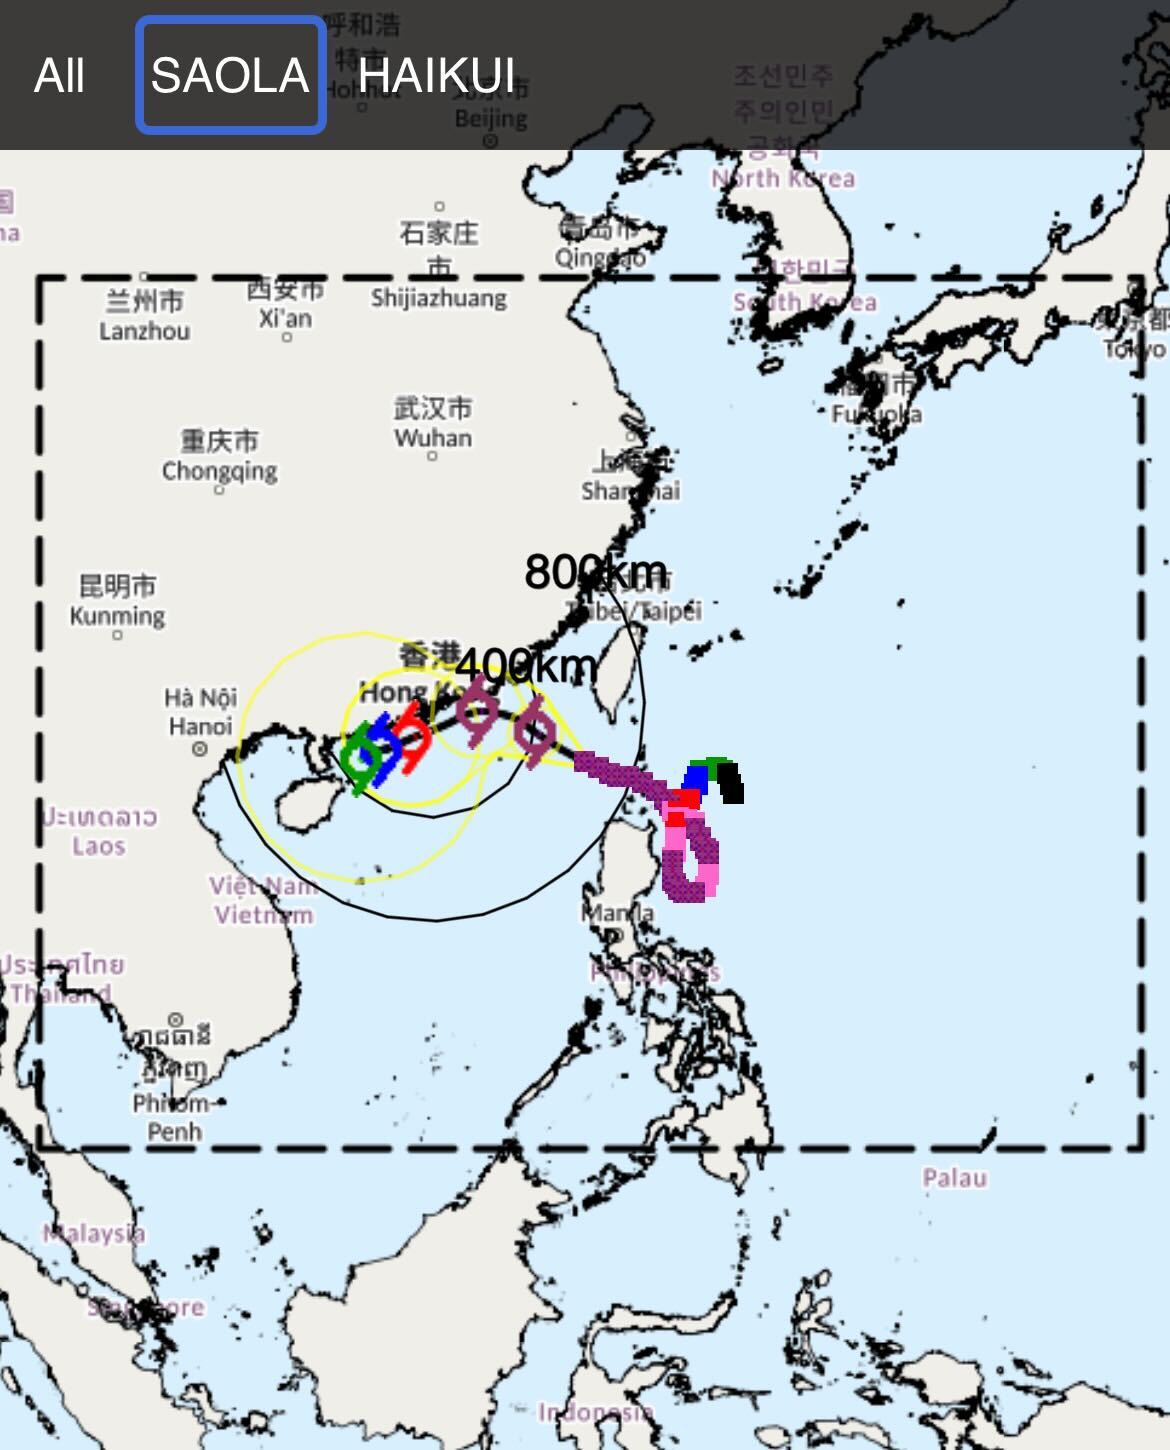 A screenshot of from the Hong Kong Observatory showing the track of Typhoon Saola with respect to Hong Kong.